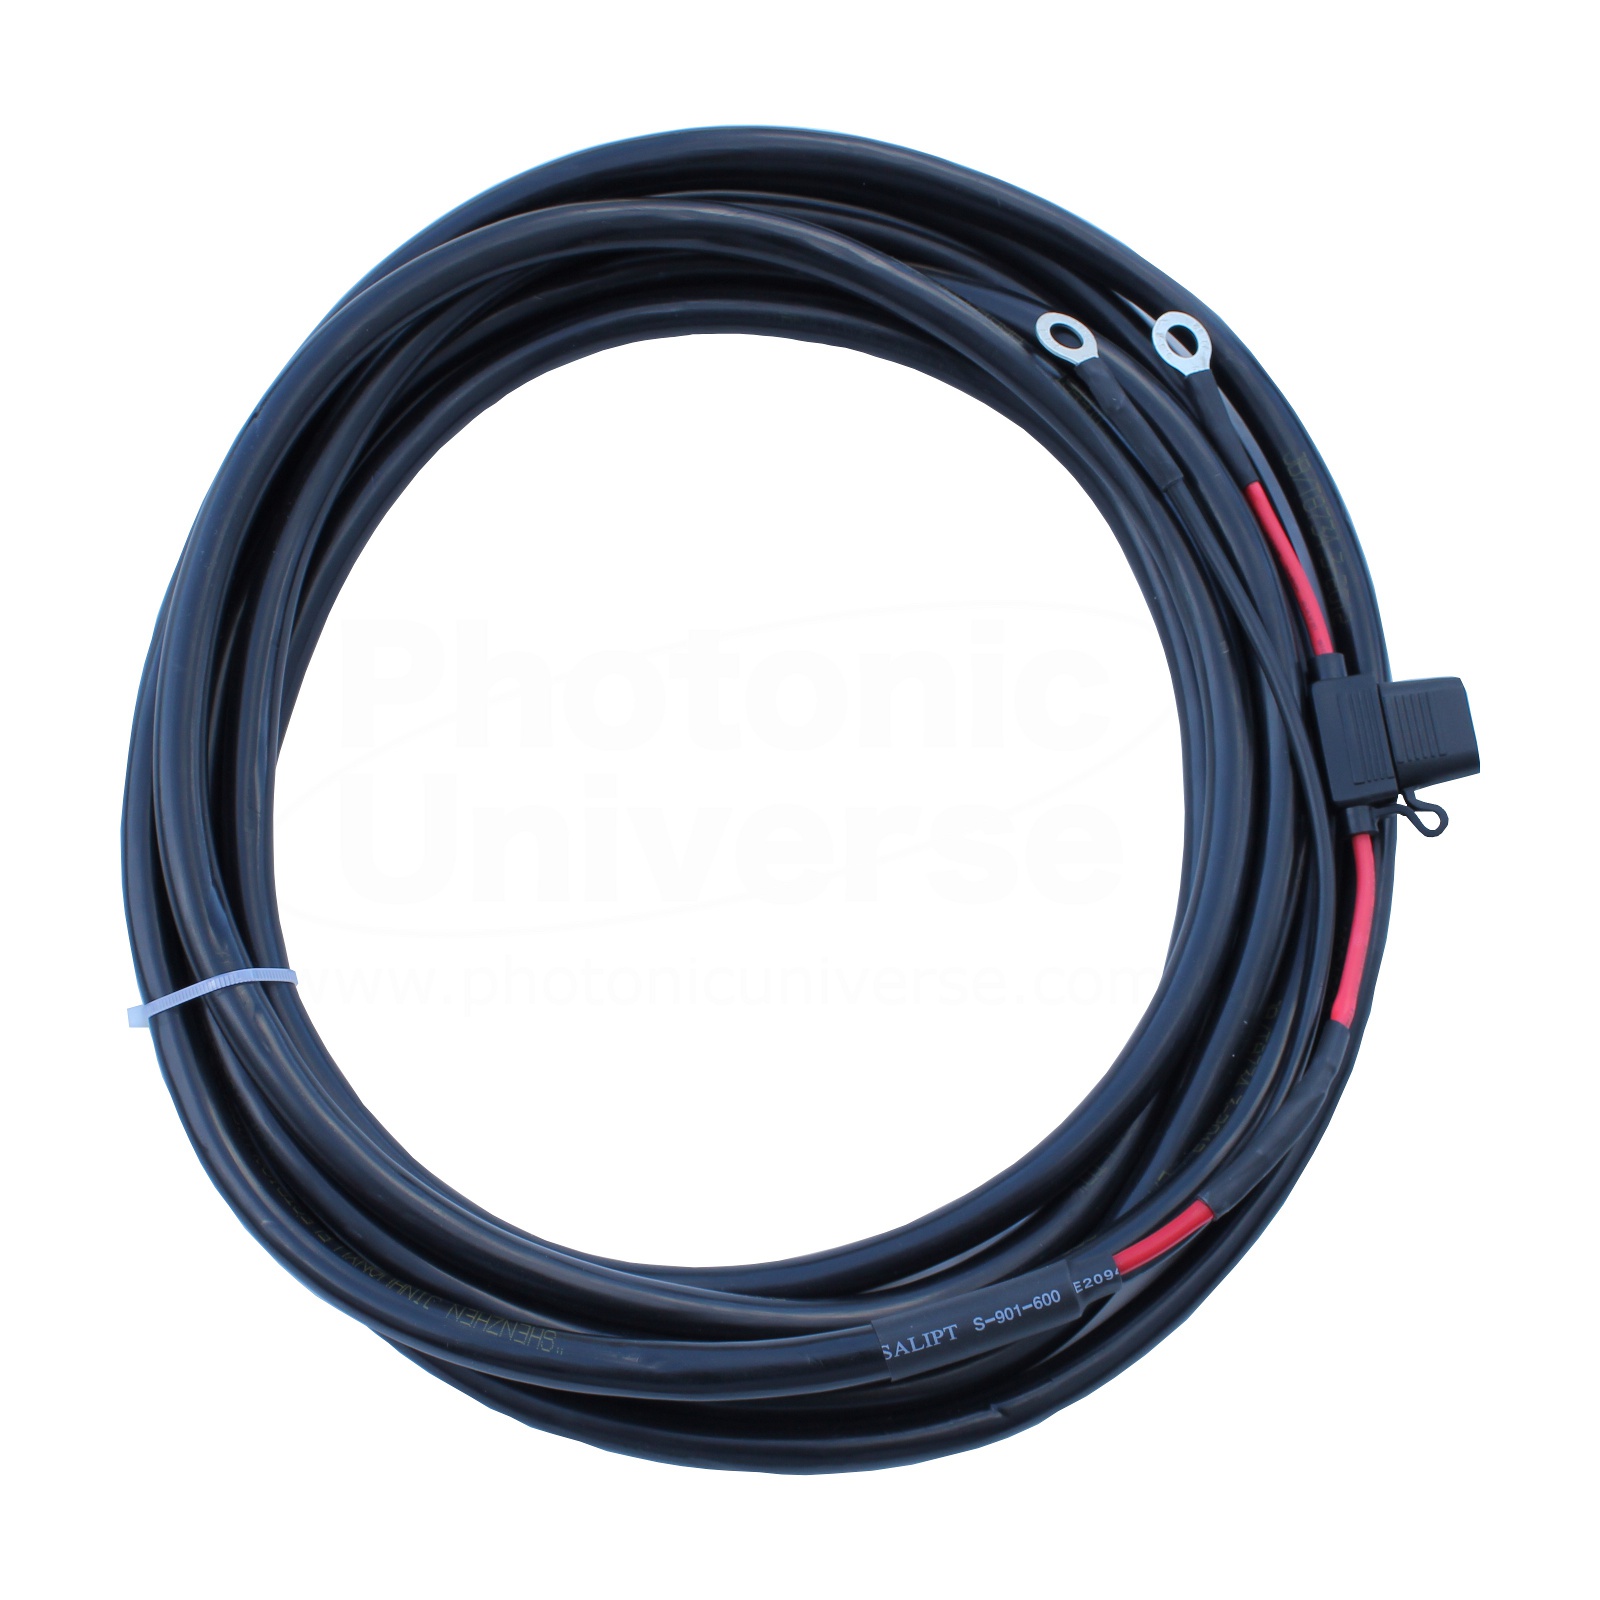 Photonic Universe battery cable 2.5mm cross section